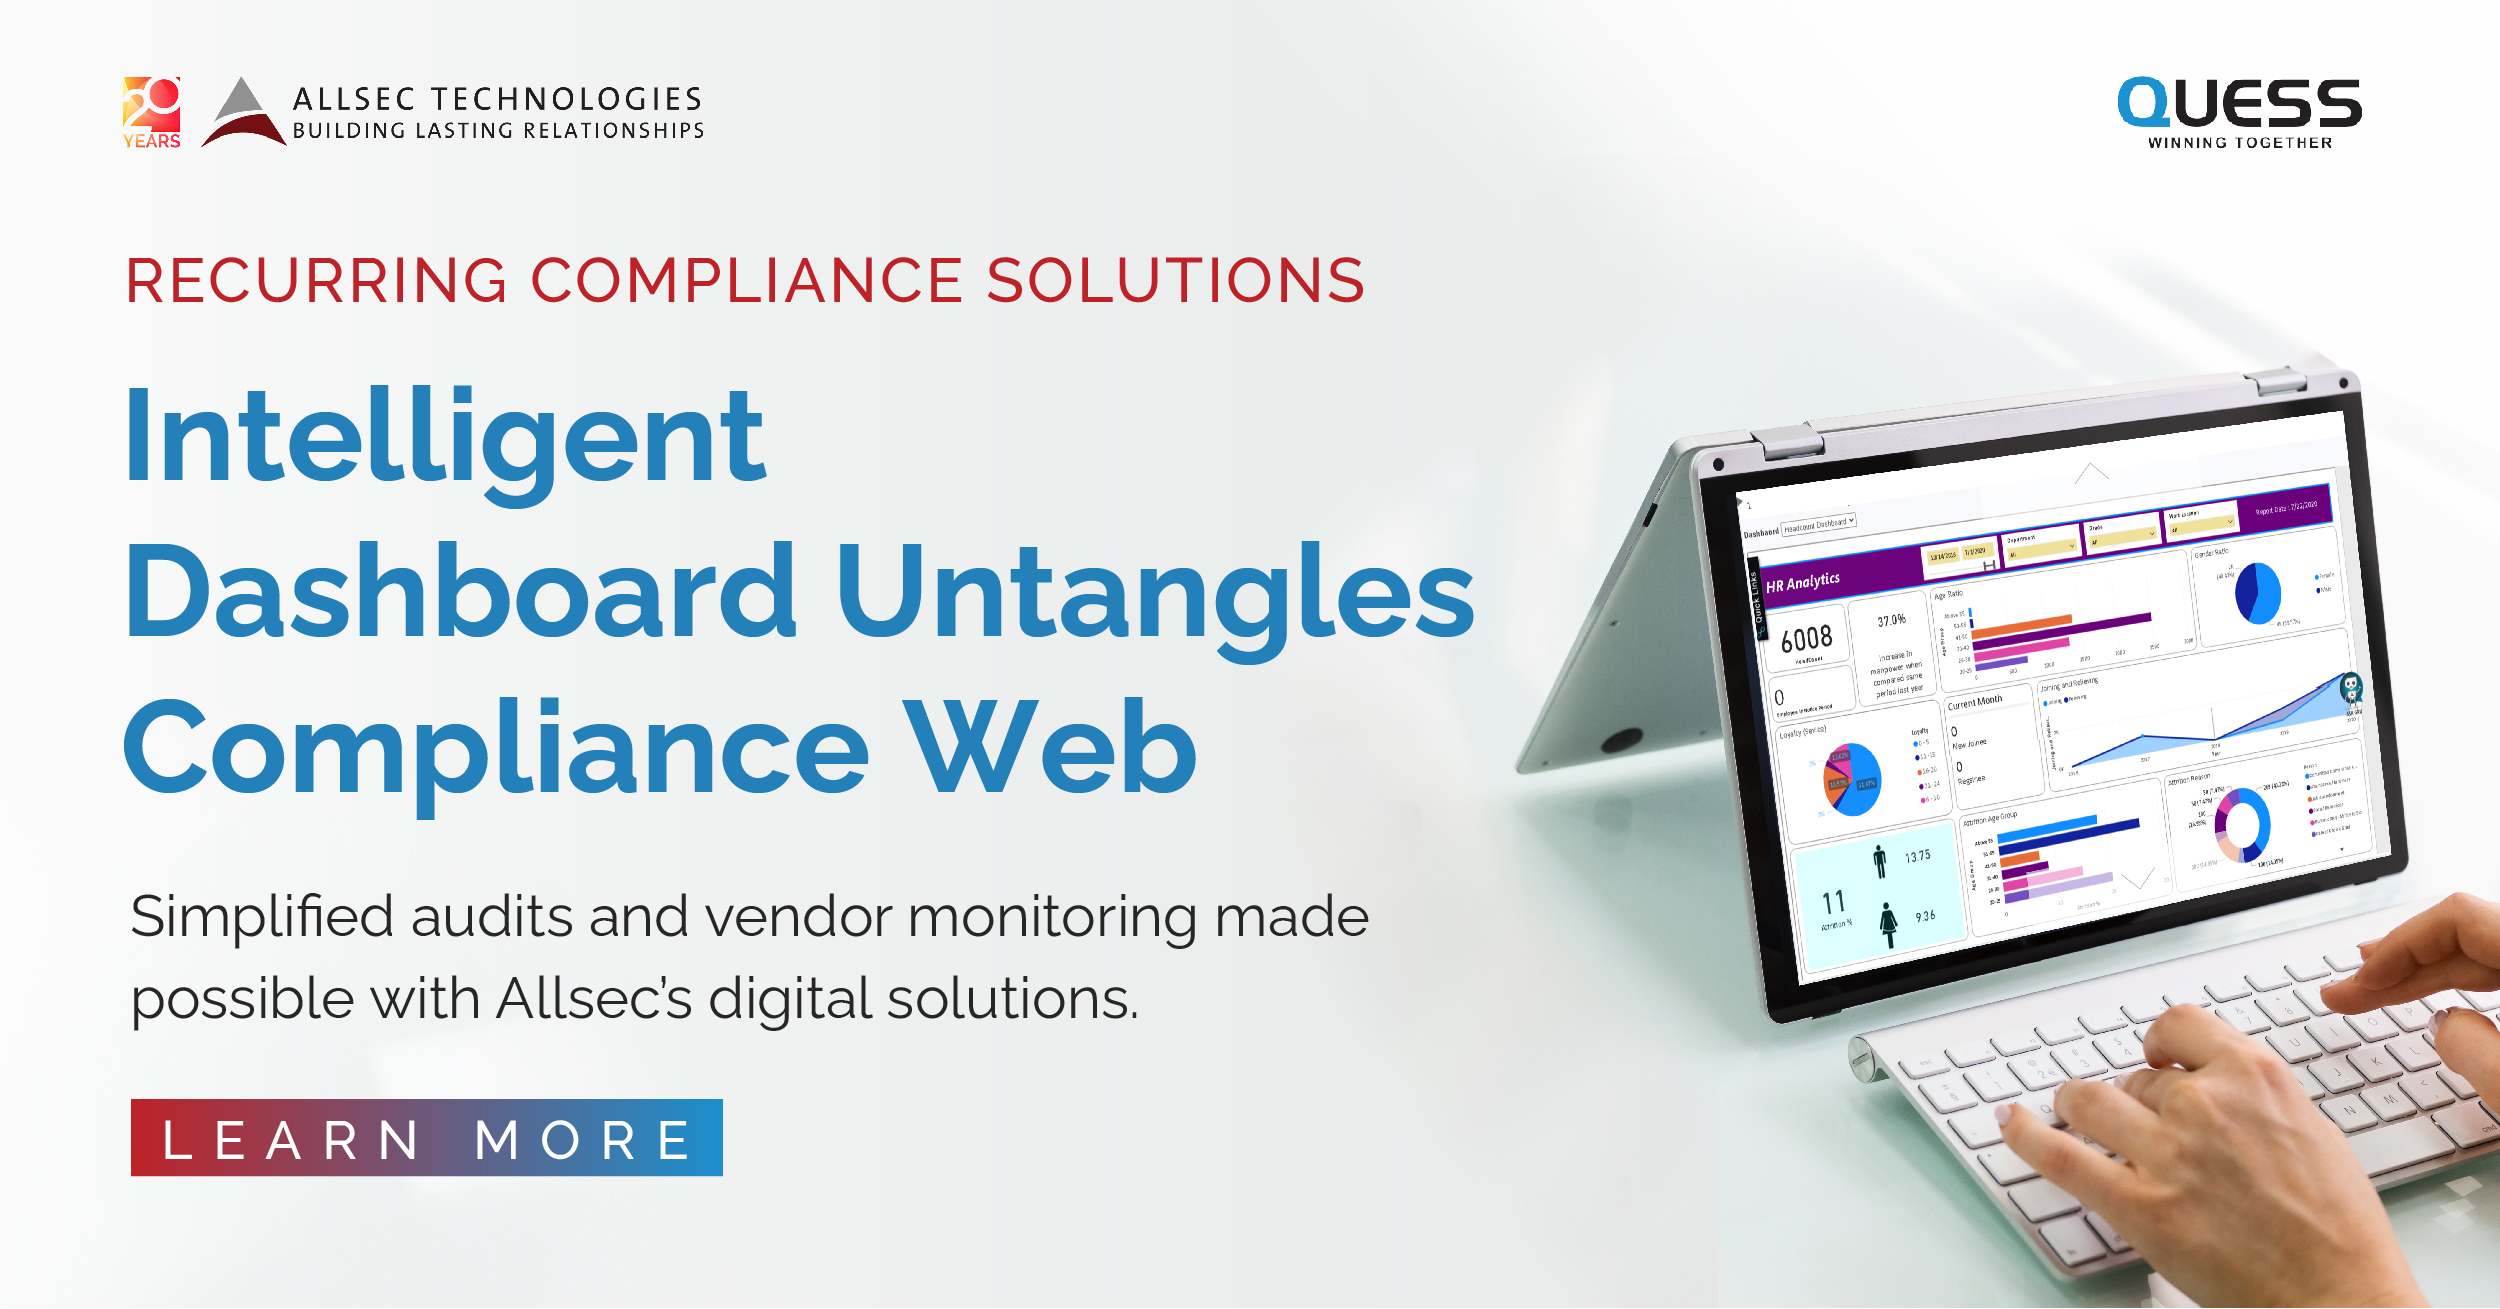 Intelligent Dashboard Untangles Compliance Web for recurring compliance solutions